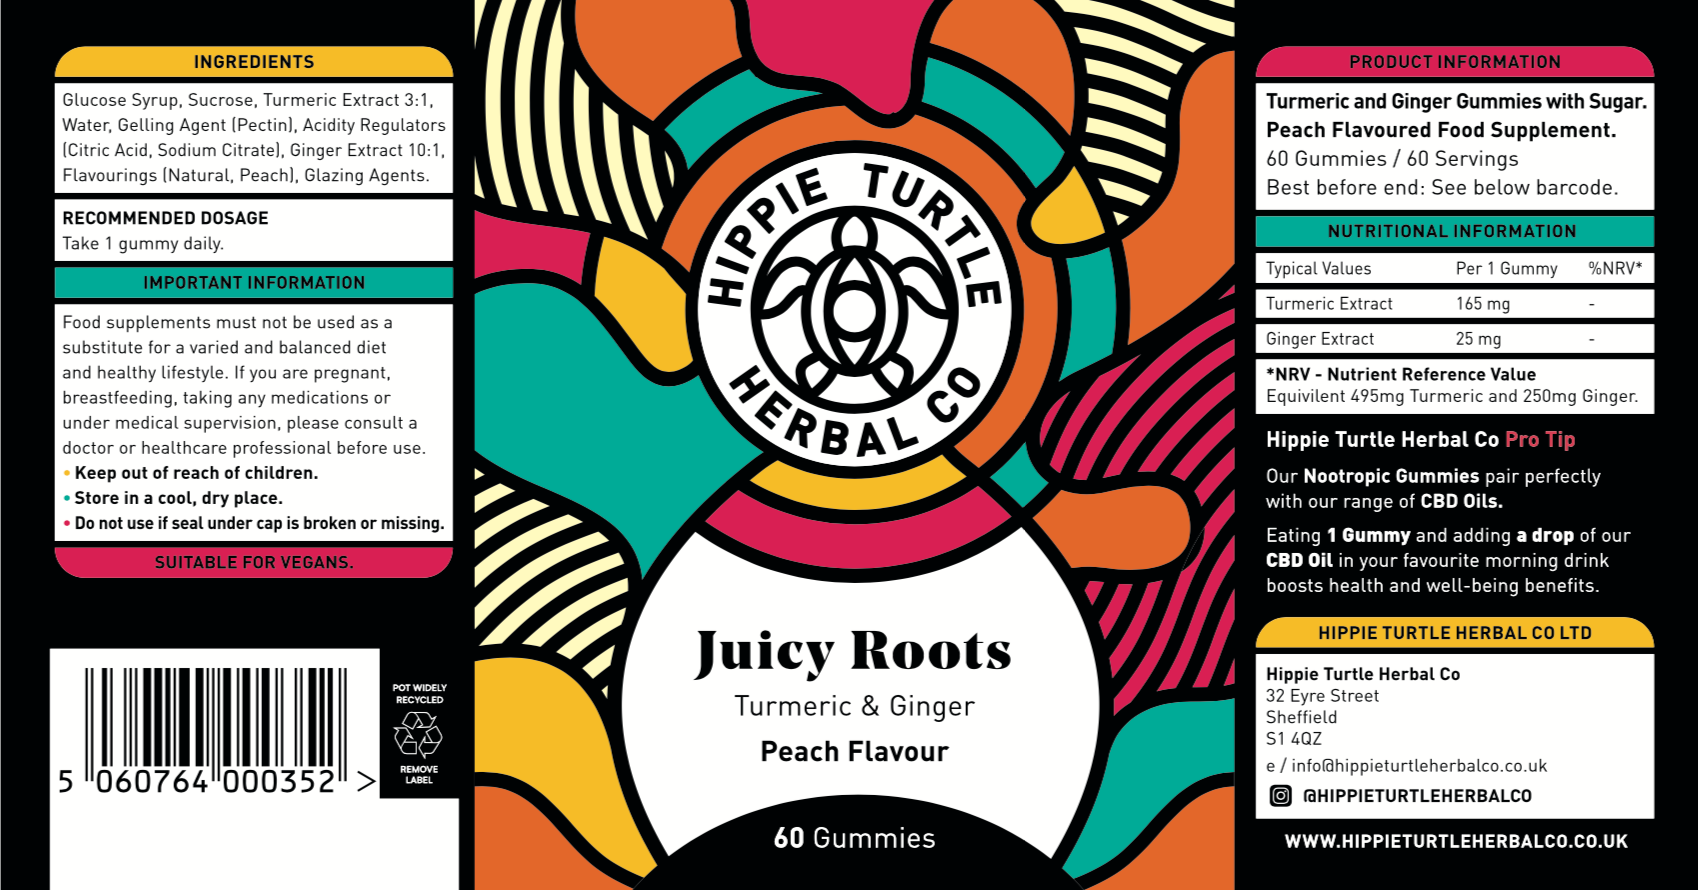 Juicy Roots chewable turmeric and ginger supplement gummies for digestive health and joint pain